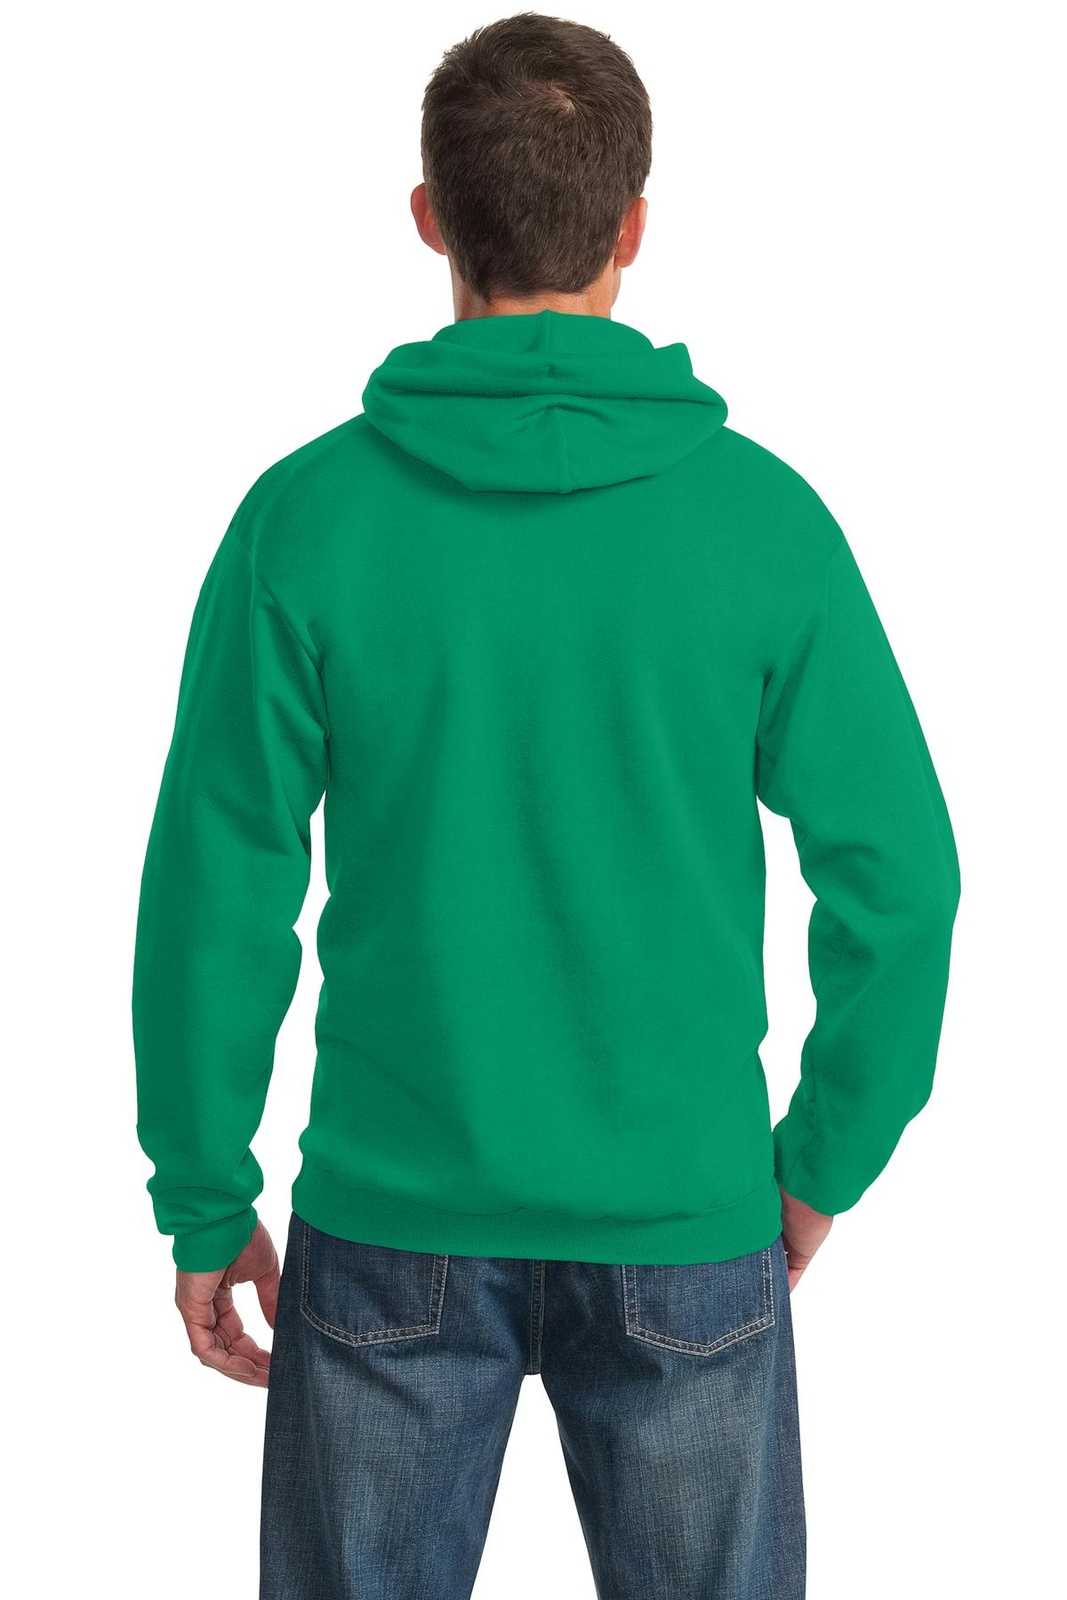 Port &amp; Company PC90H Essential Fleece Pullover Hooded Sweatshirt - Kelly Green - HIT a Double - 2